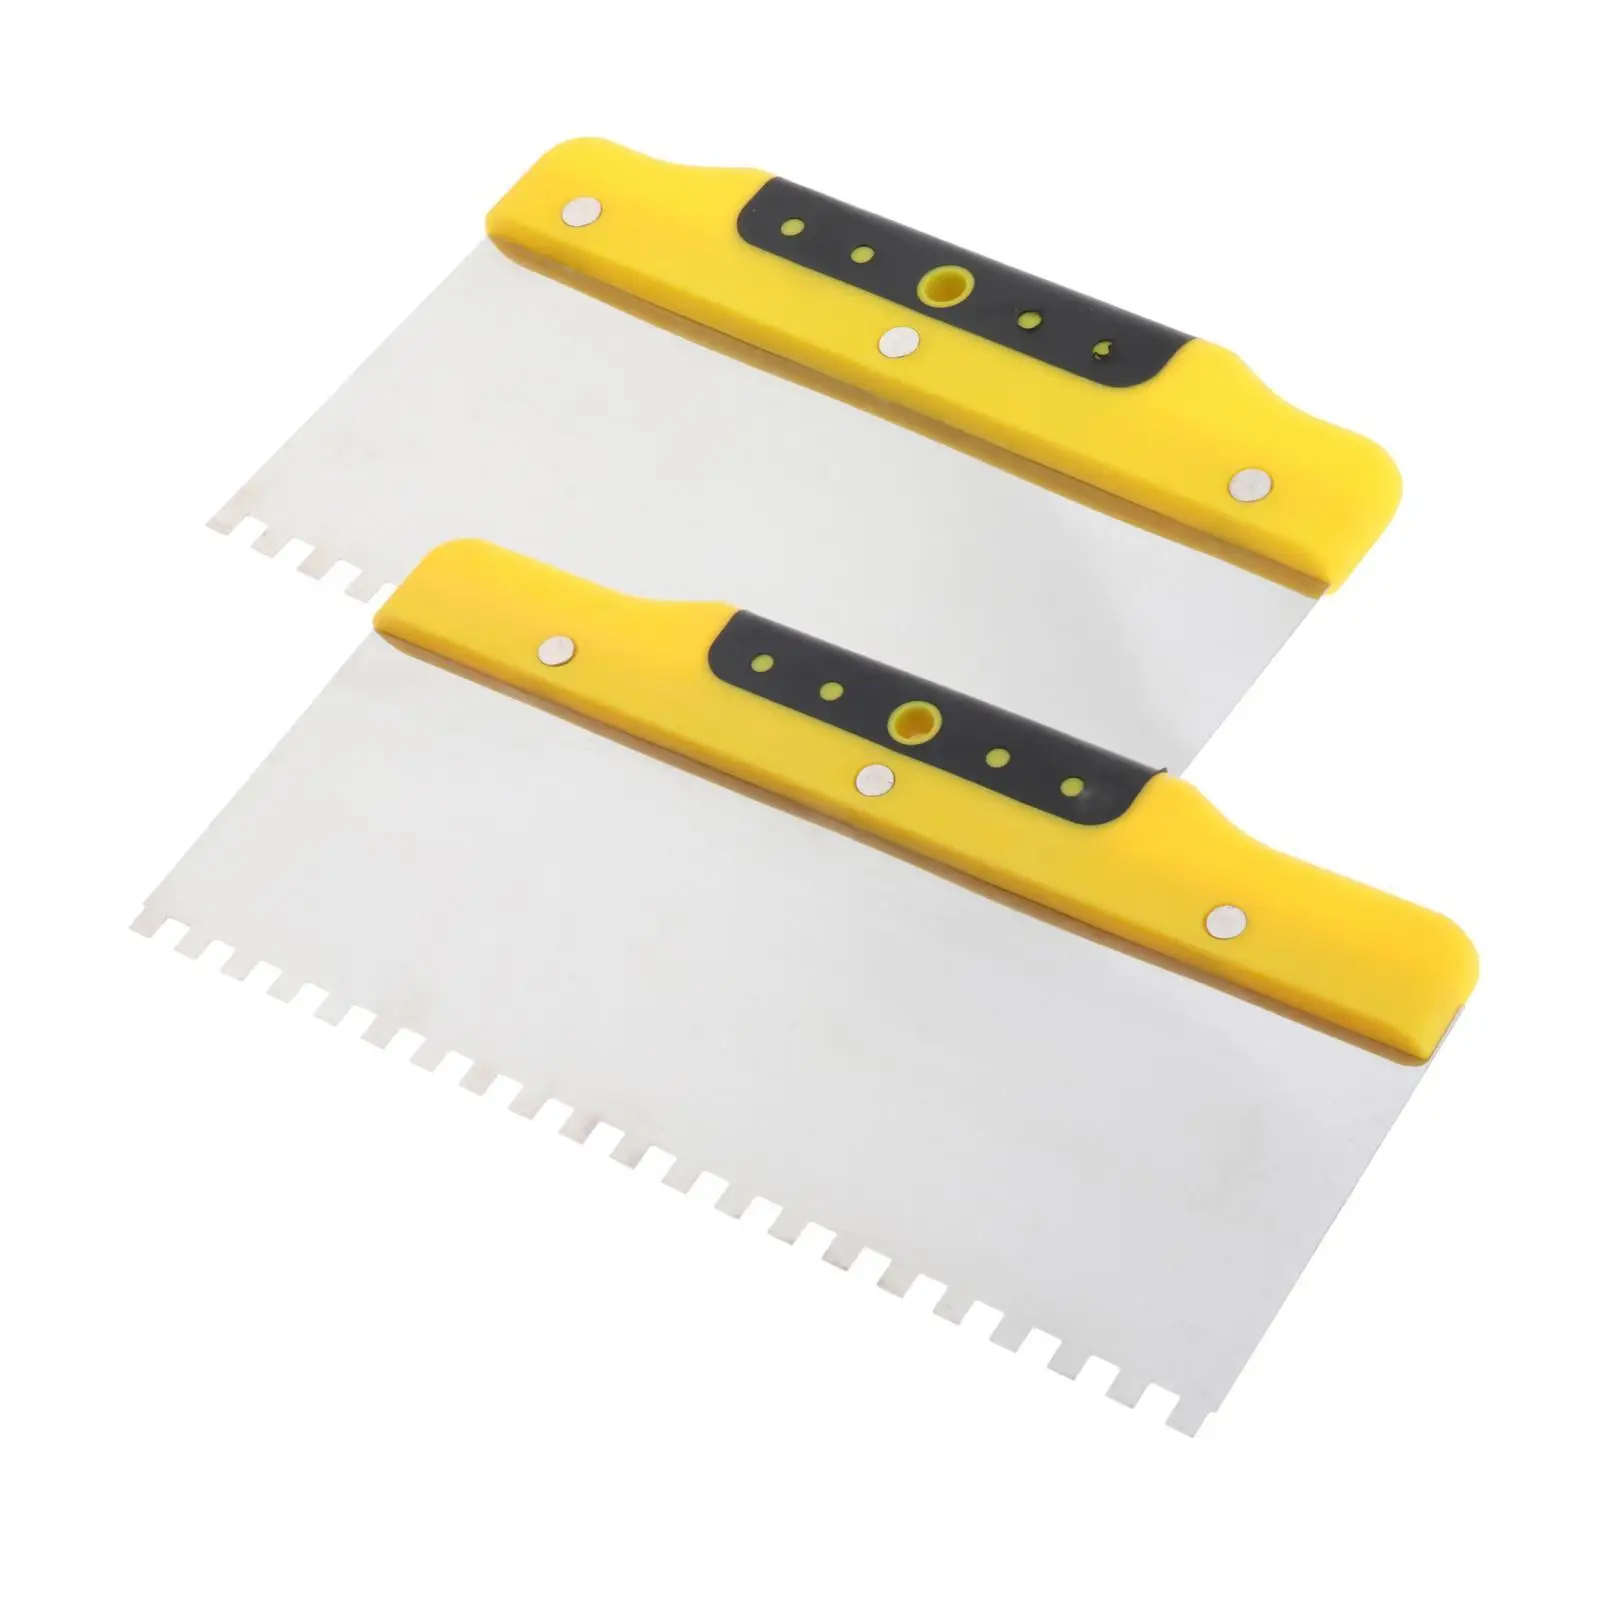 Drywall Trowel Finishing Trowel Concrete Scraper Plastering Toothed Spatula